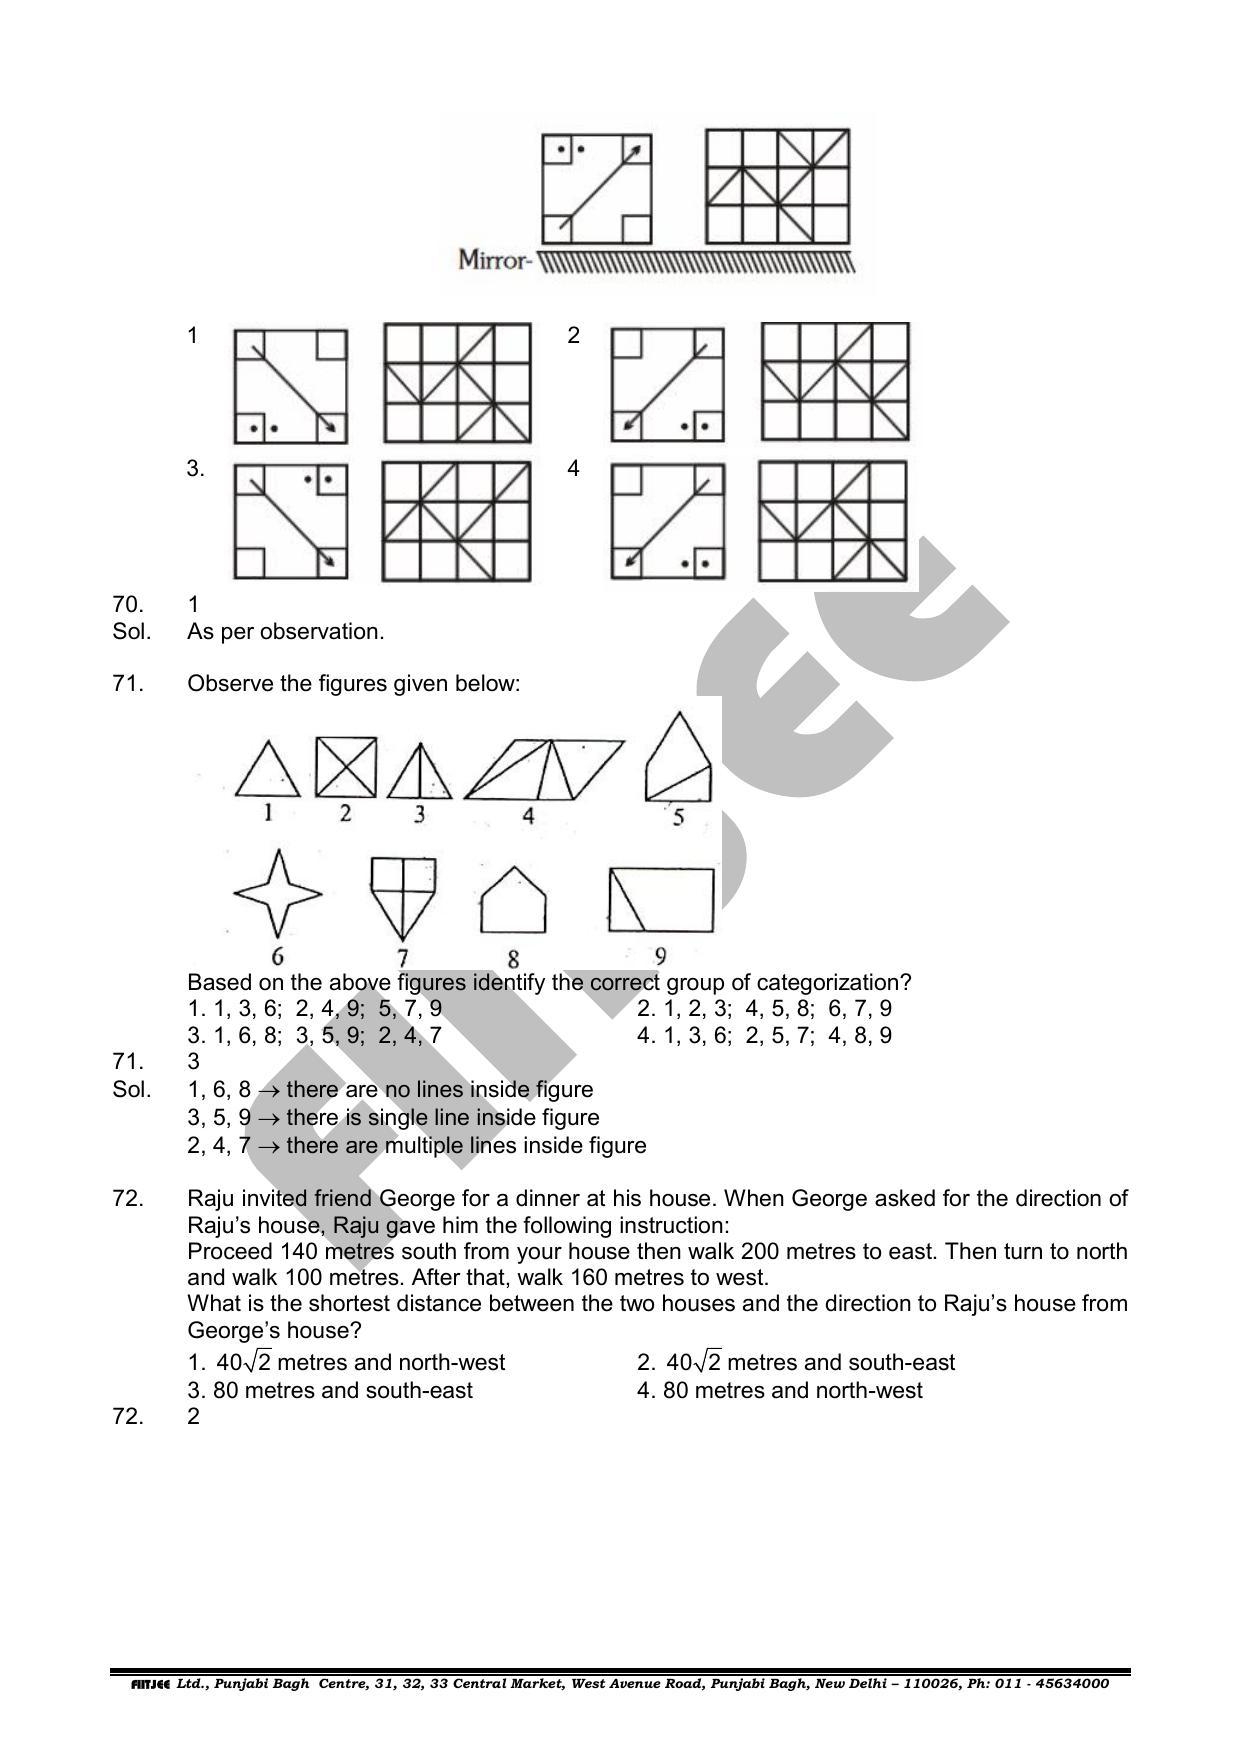 NTSE 2019 (Stage II) MAT Question Paper with Solution (June 16, 2019) - Page 23